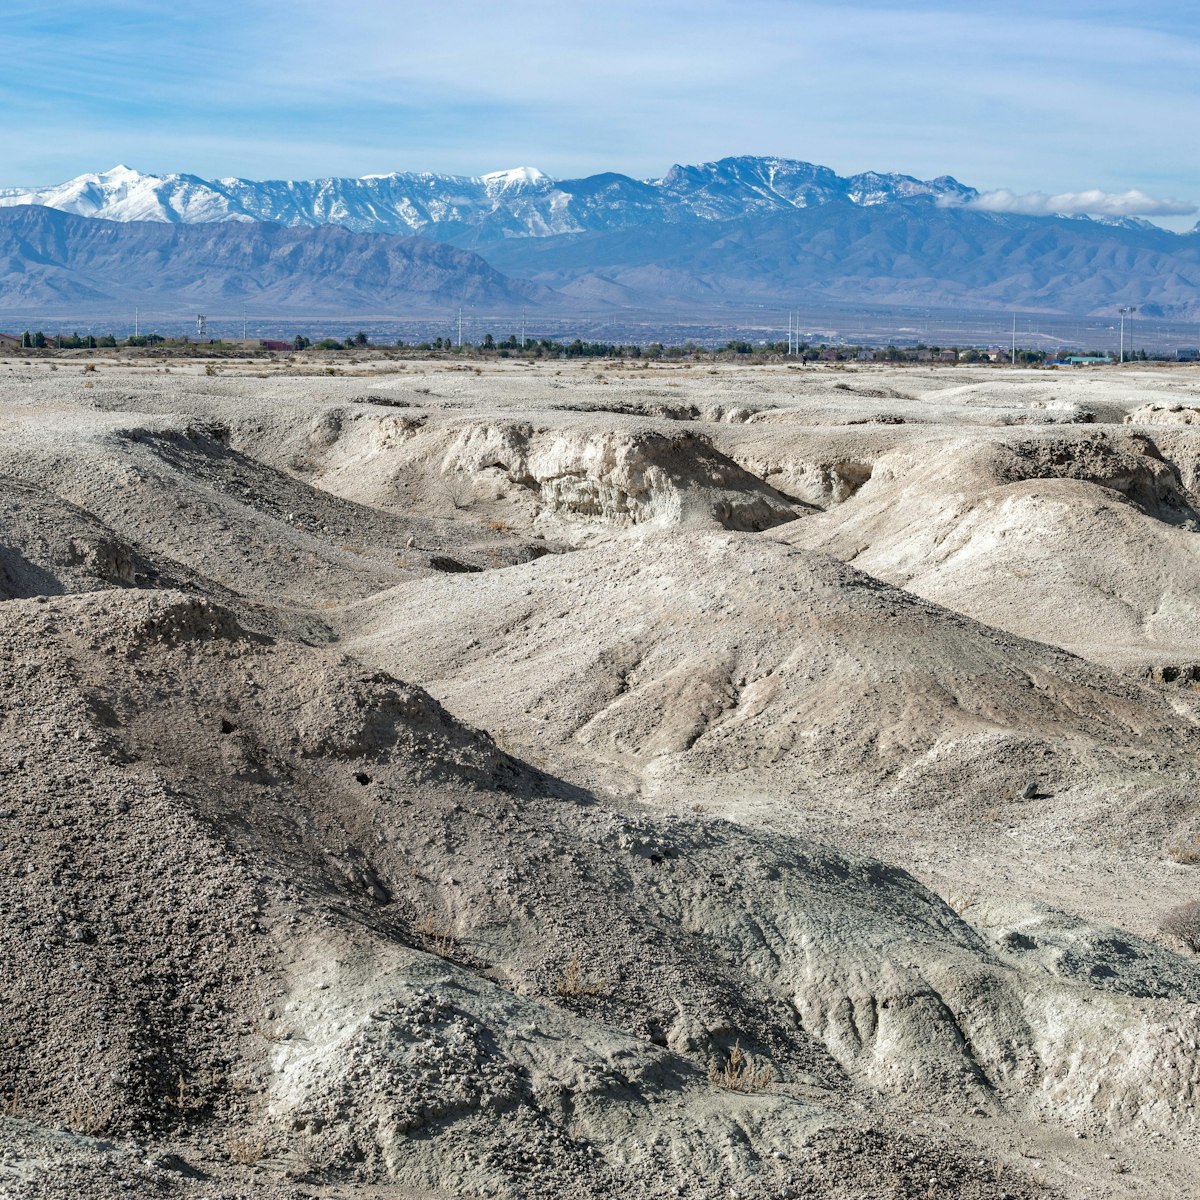 USA, Nevada, Clark County, Tule Fossil Beds National Monument: White gypsum hills at the urban fringe along the Las Vegas Wash with Mt. Charleston in the distance.; Shutterstock ID 1583690590; your: Bridget Brown; gl: 65050; netsuite: Online Editorial; full: POI Image Update